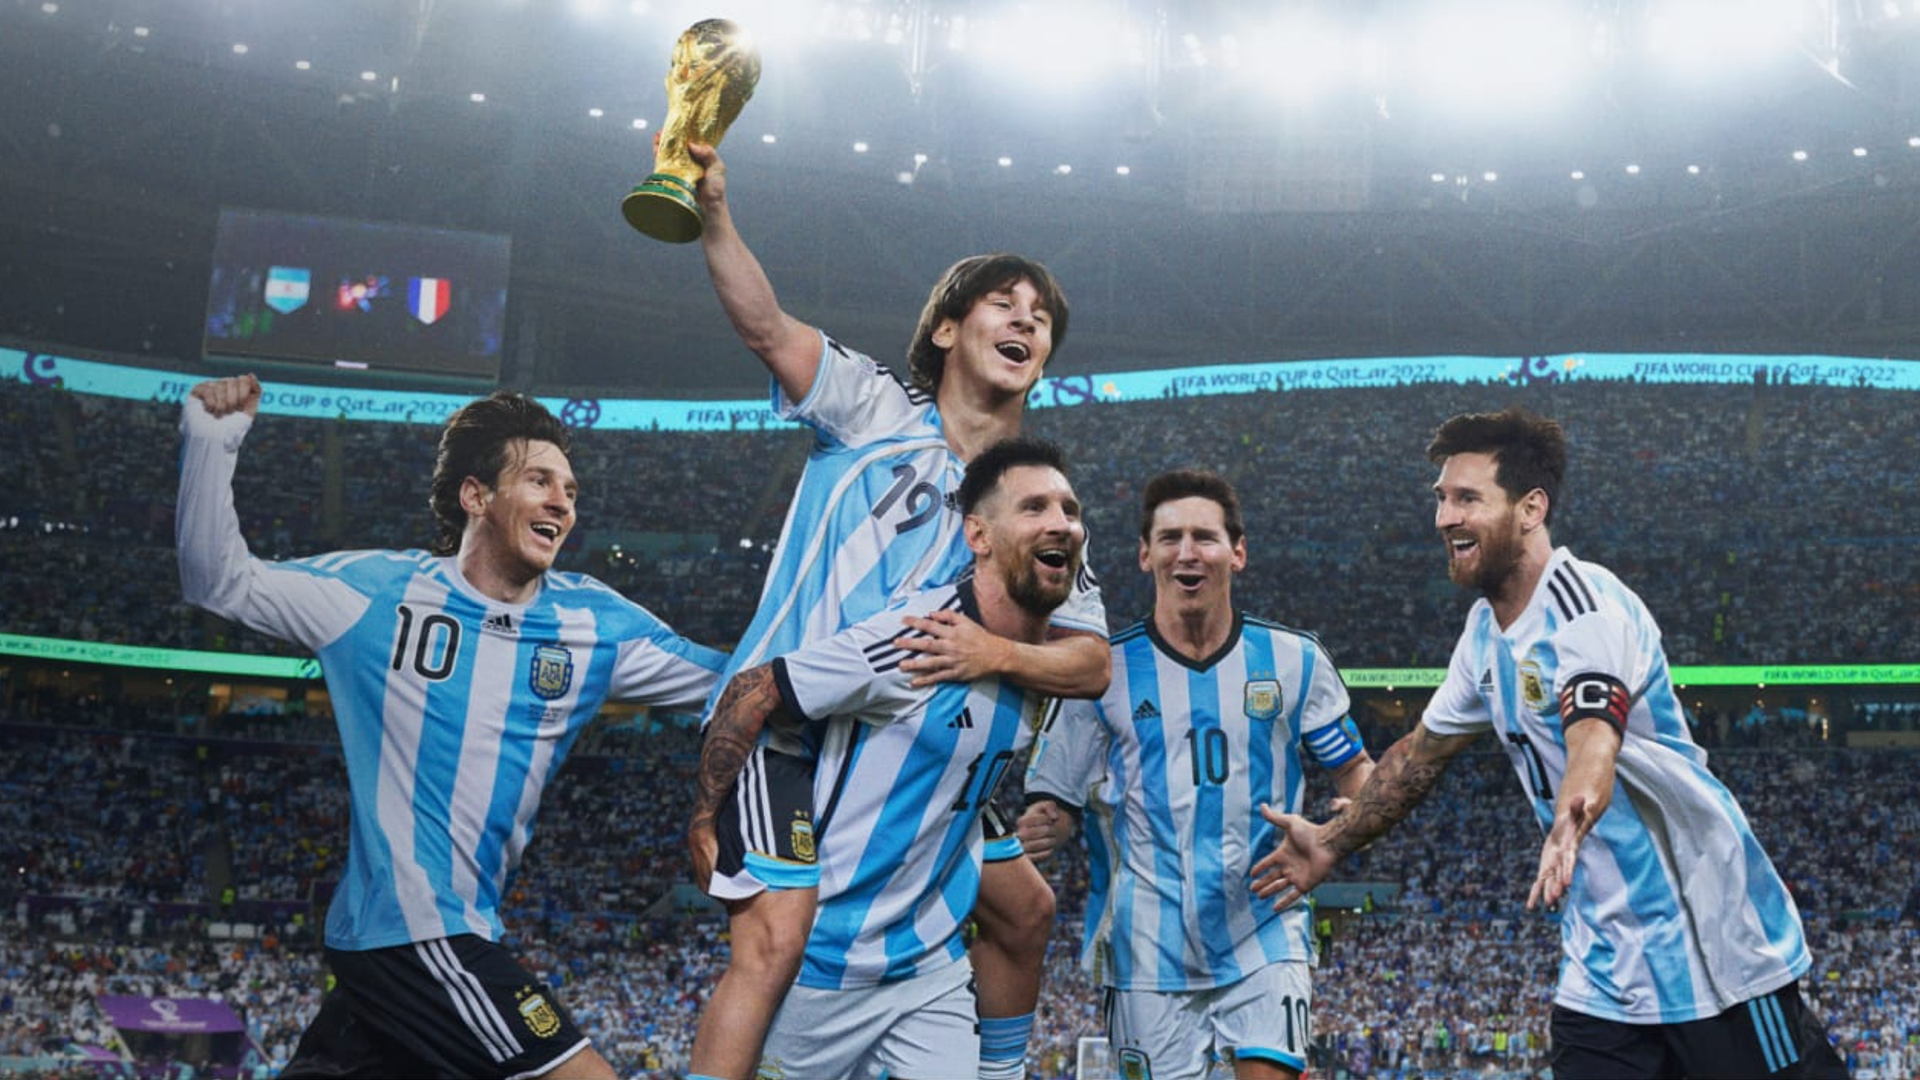 Lionel Messi's Argentina jerseys are sold out worldwide